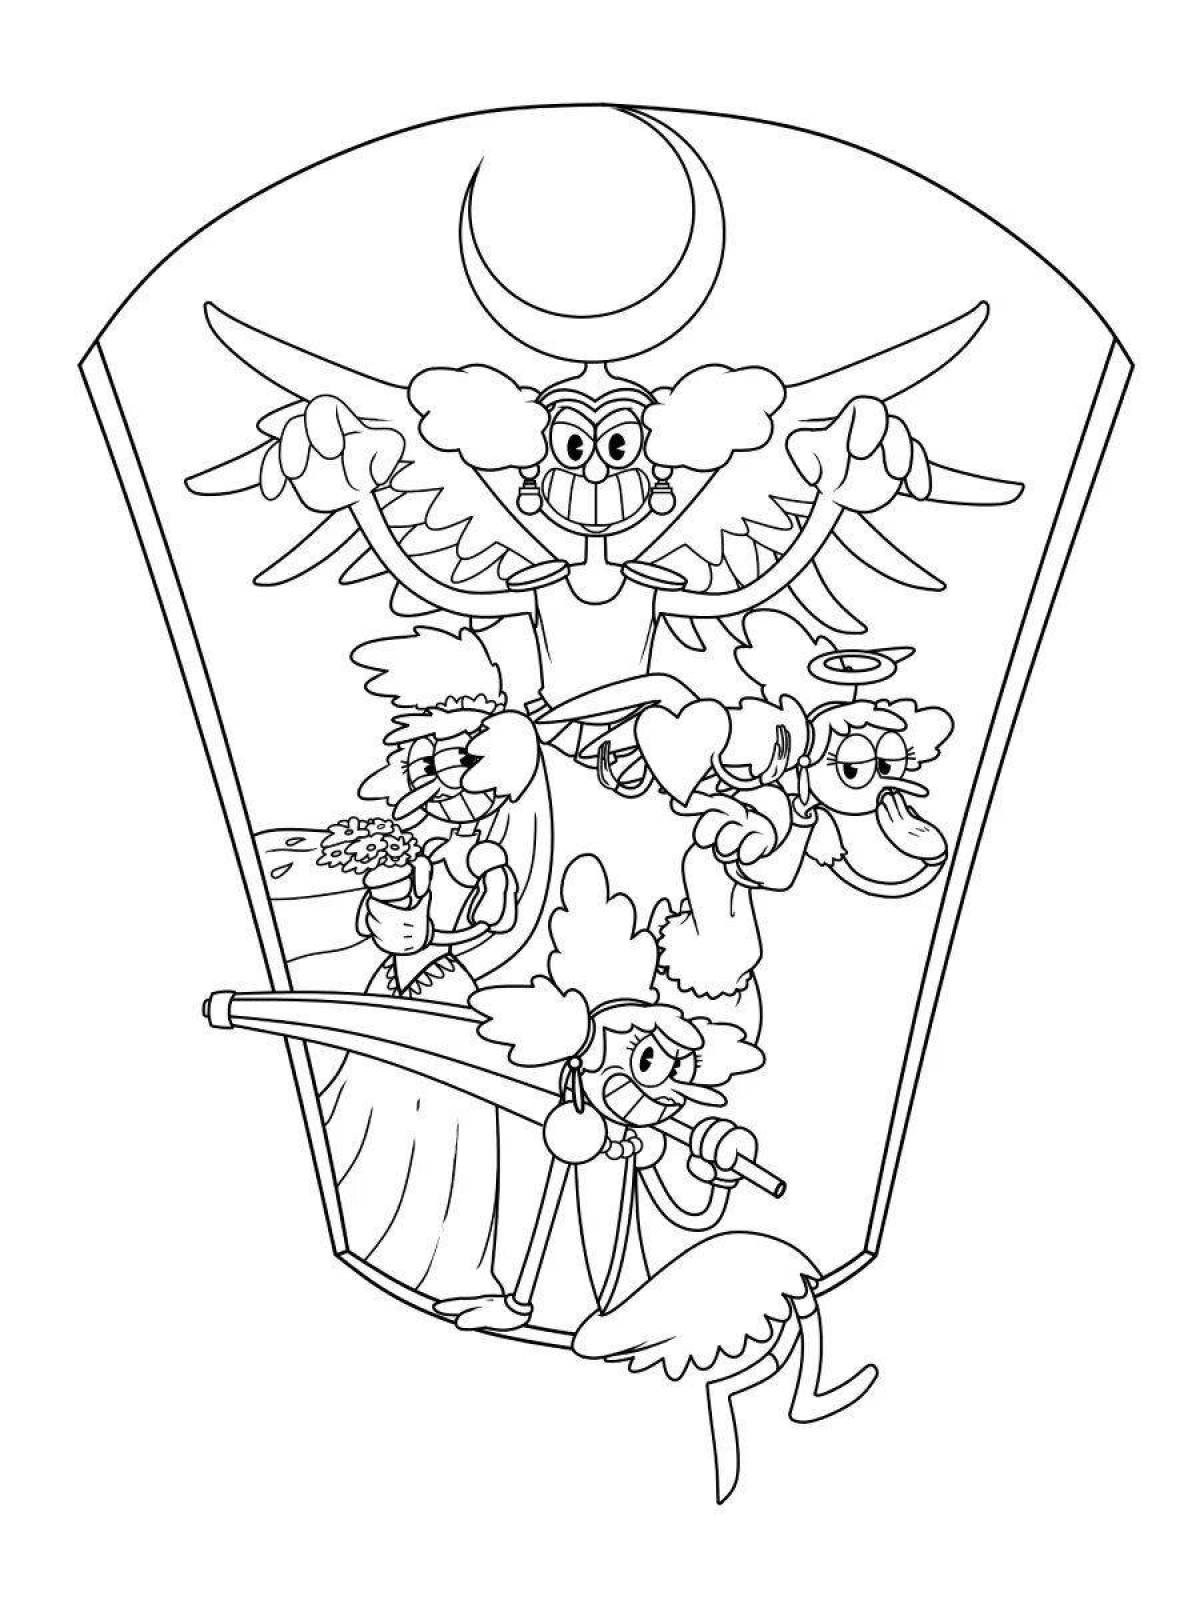 Playful cuphead boss coloring page